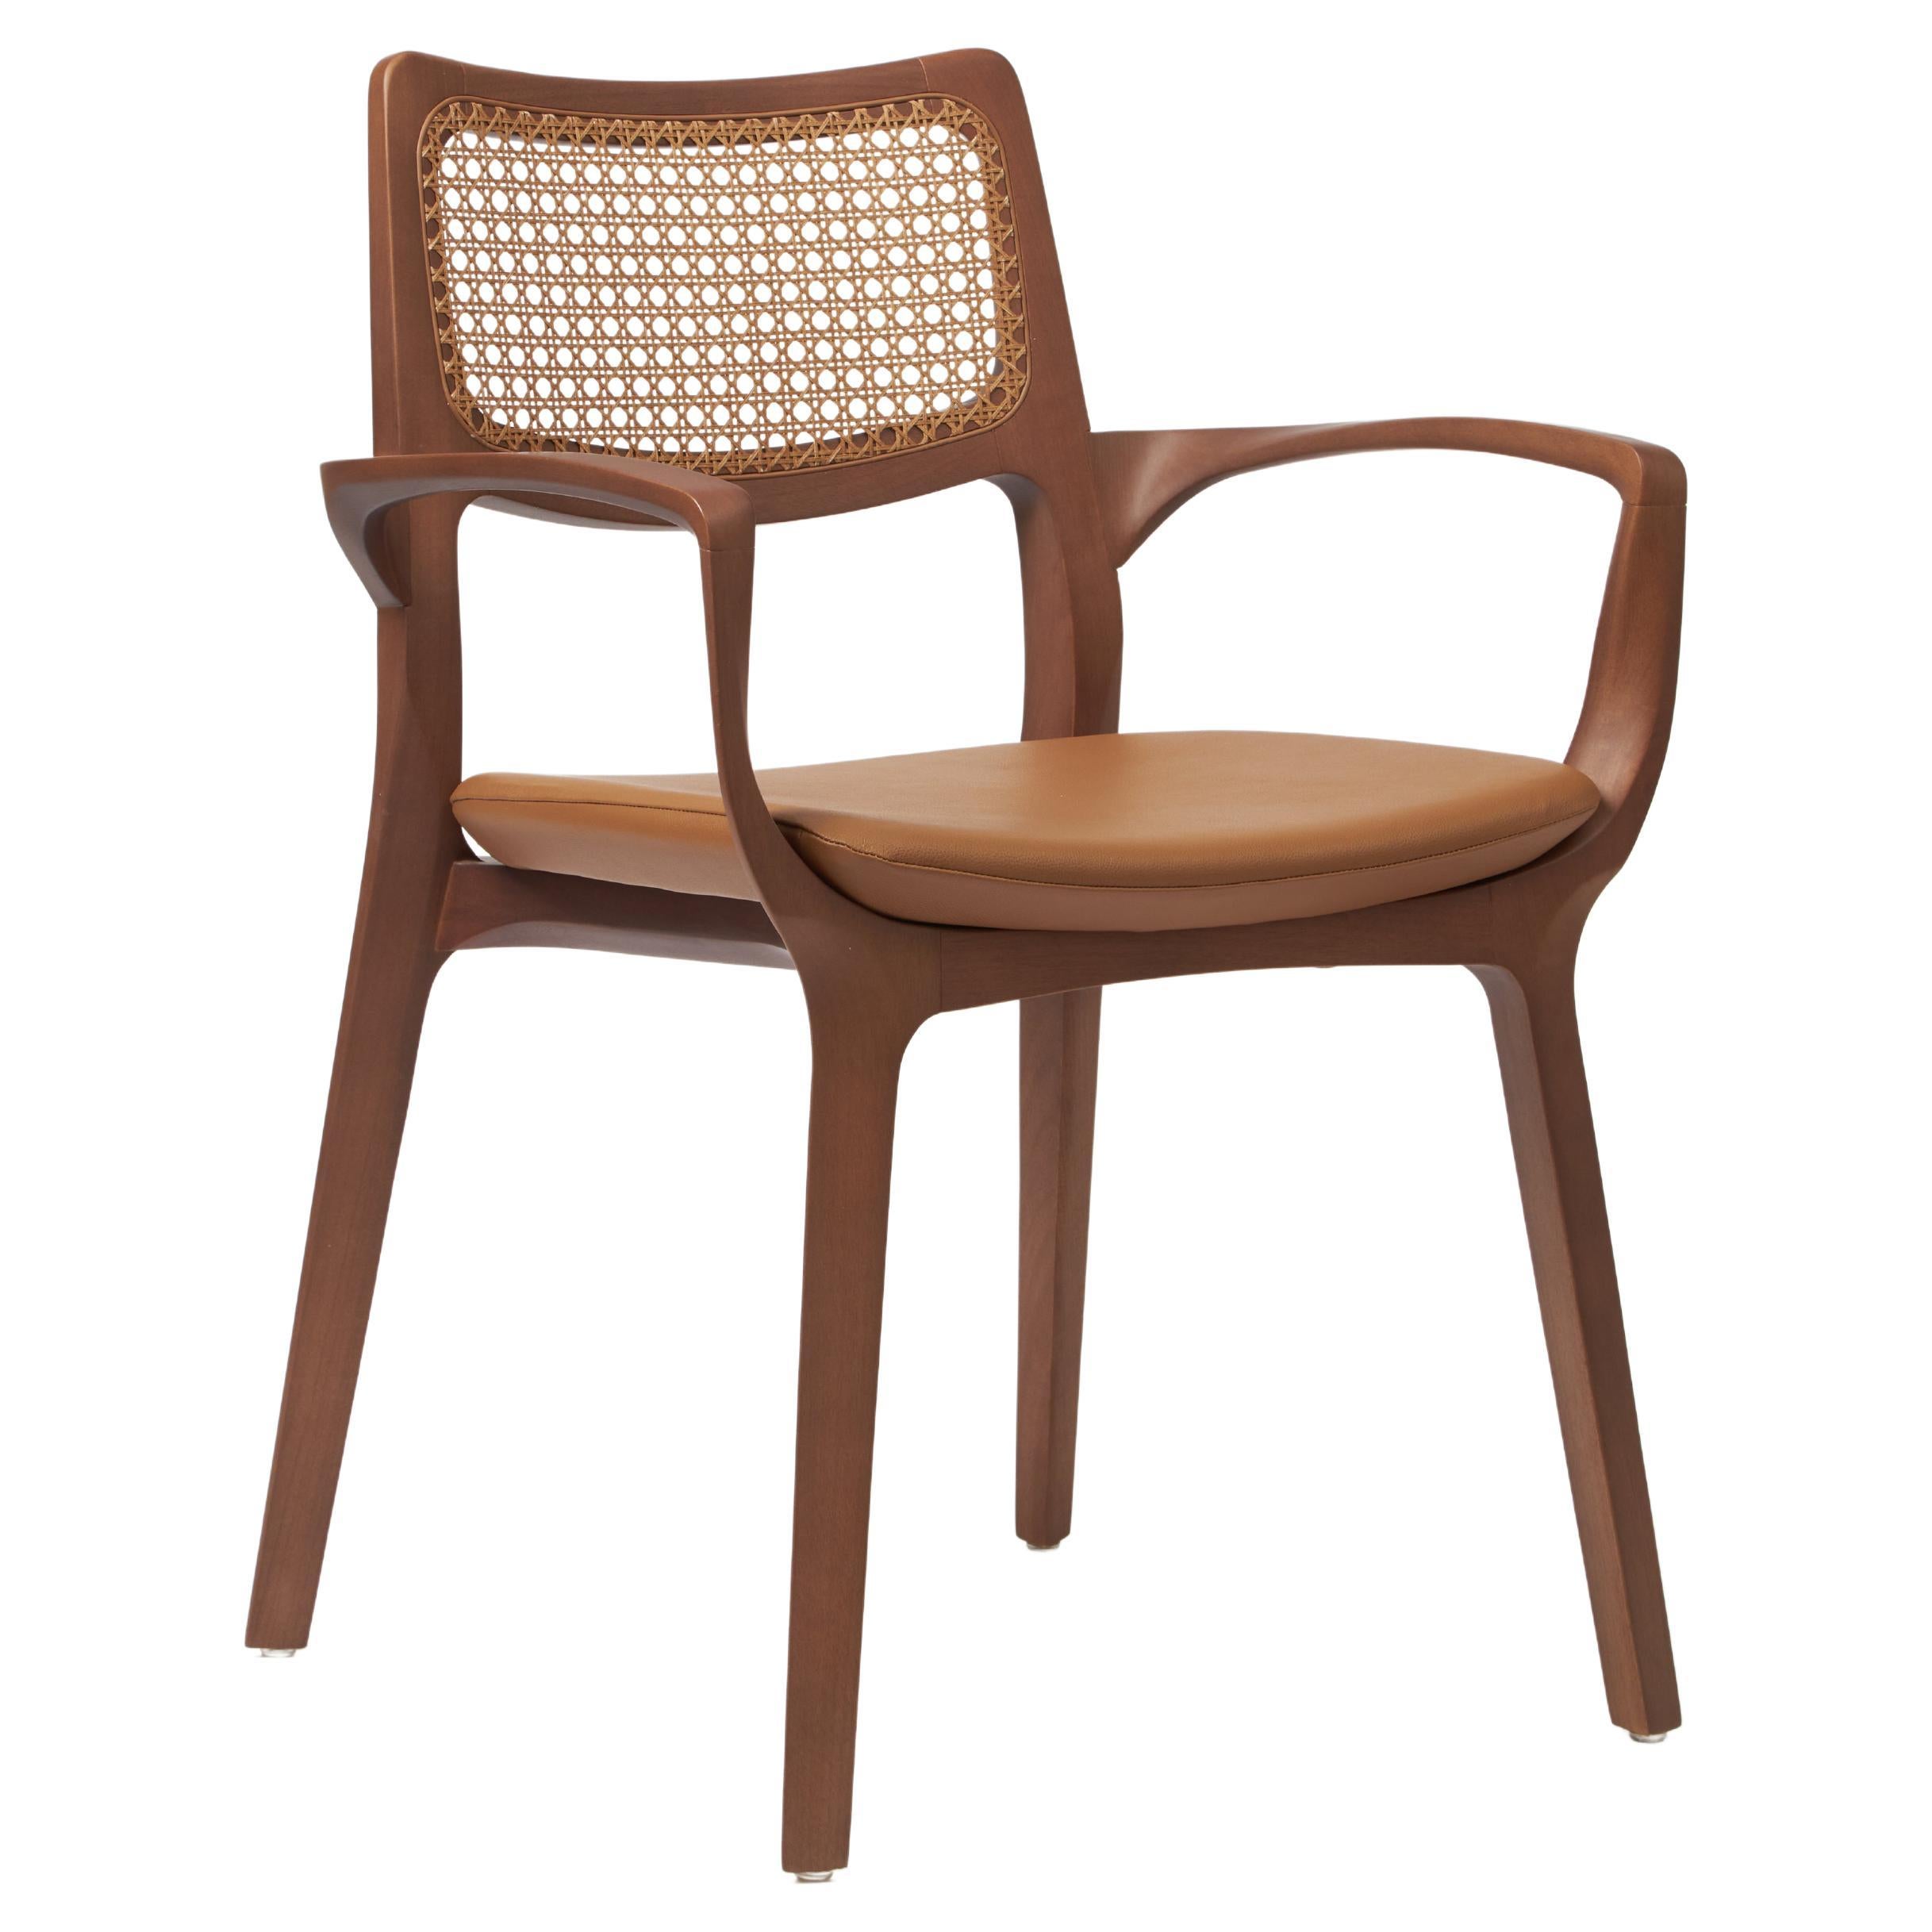 Modern Style Aurora Chair Sculpted in Walnut Finish Arms, leather seating, cane For Sale